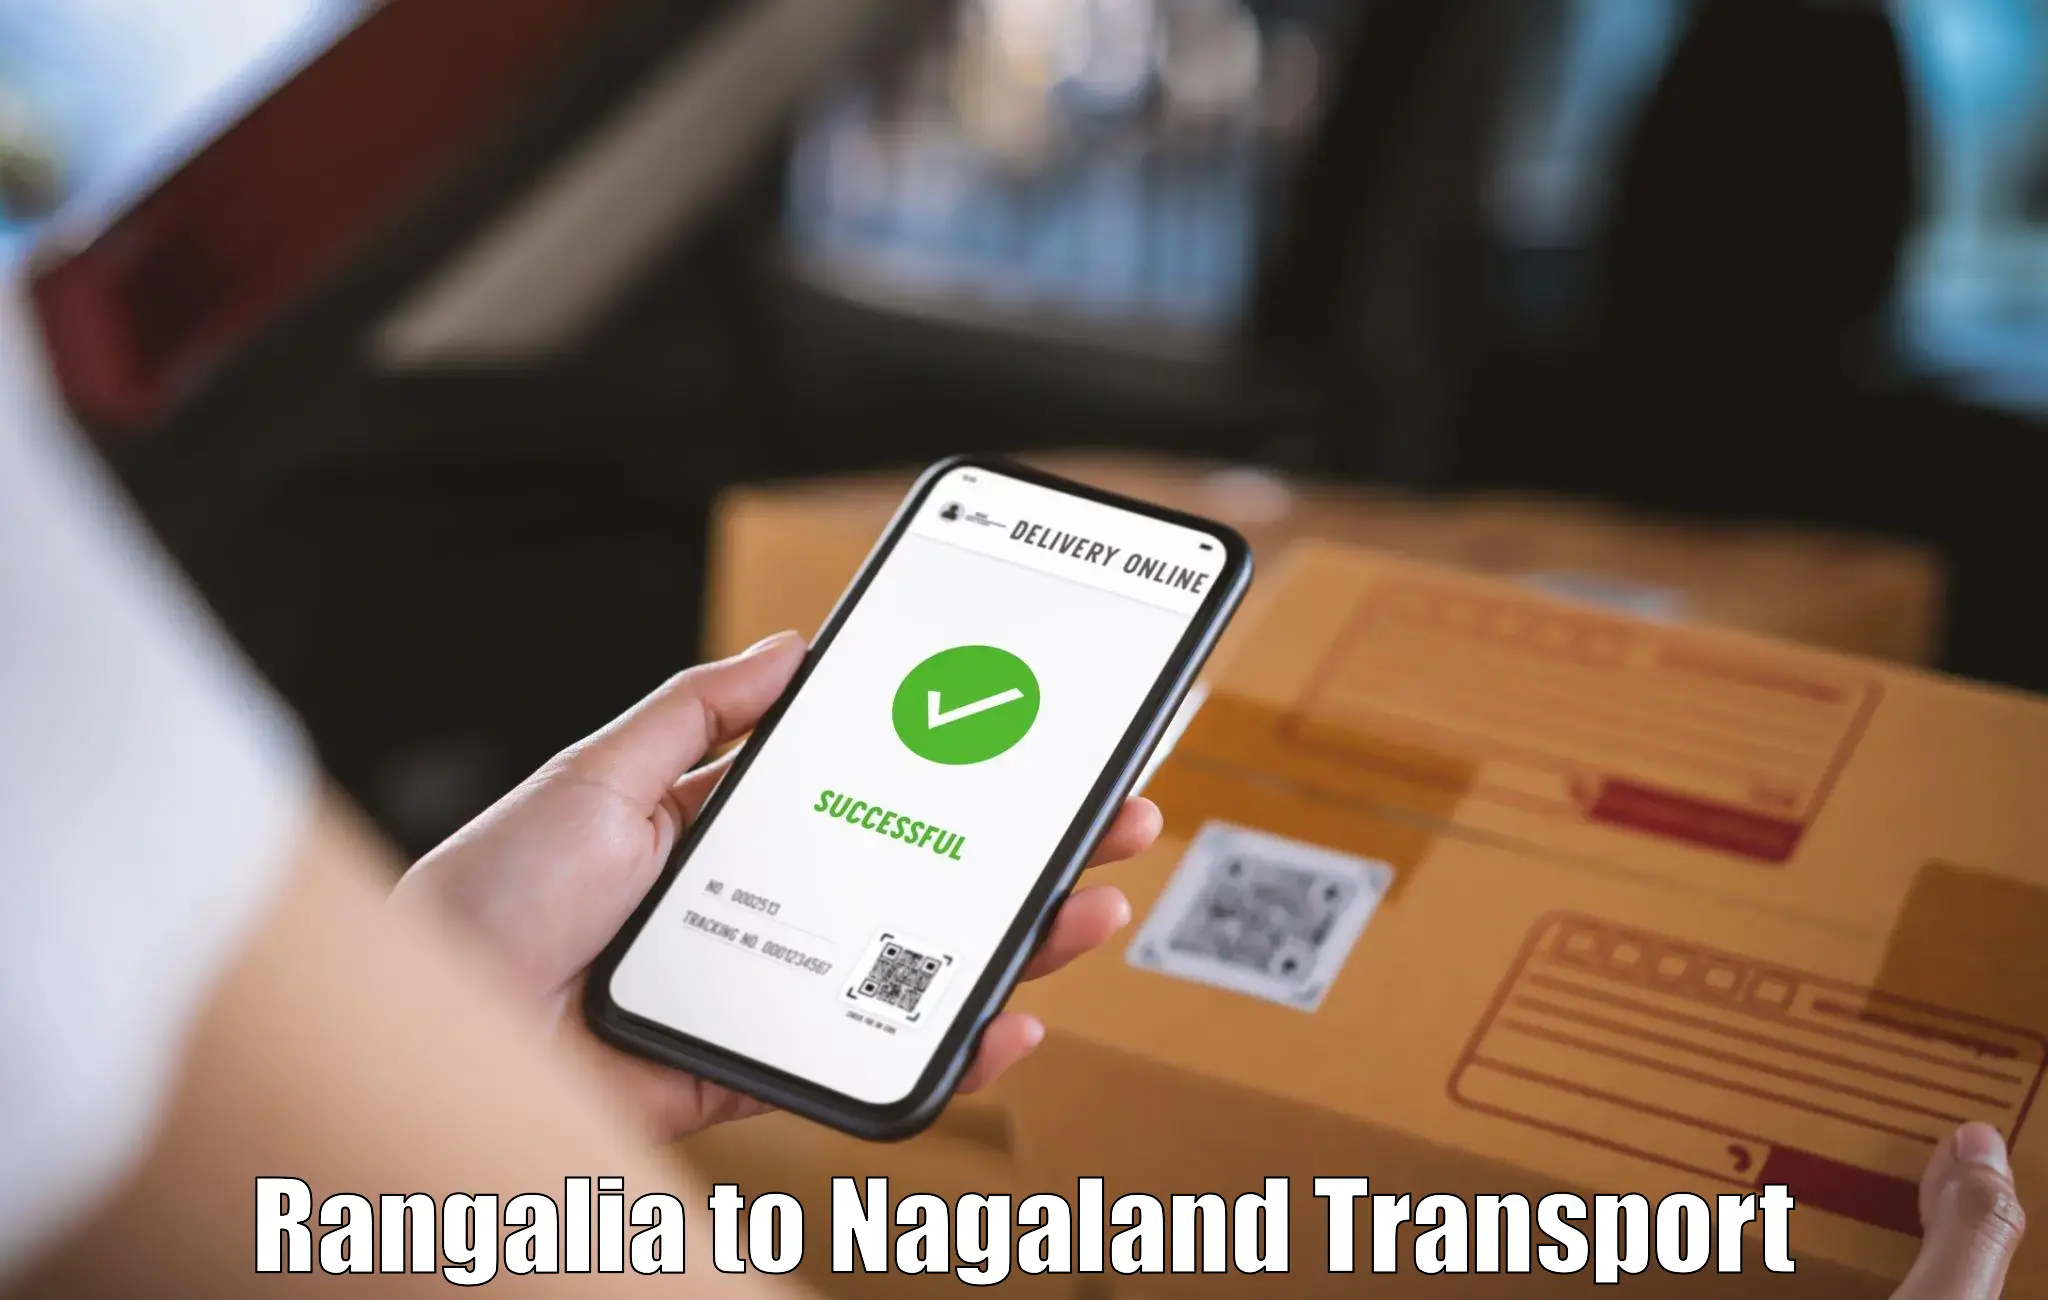 Transport in sharing in Rangalia to NIT Nagaland